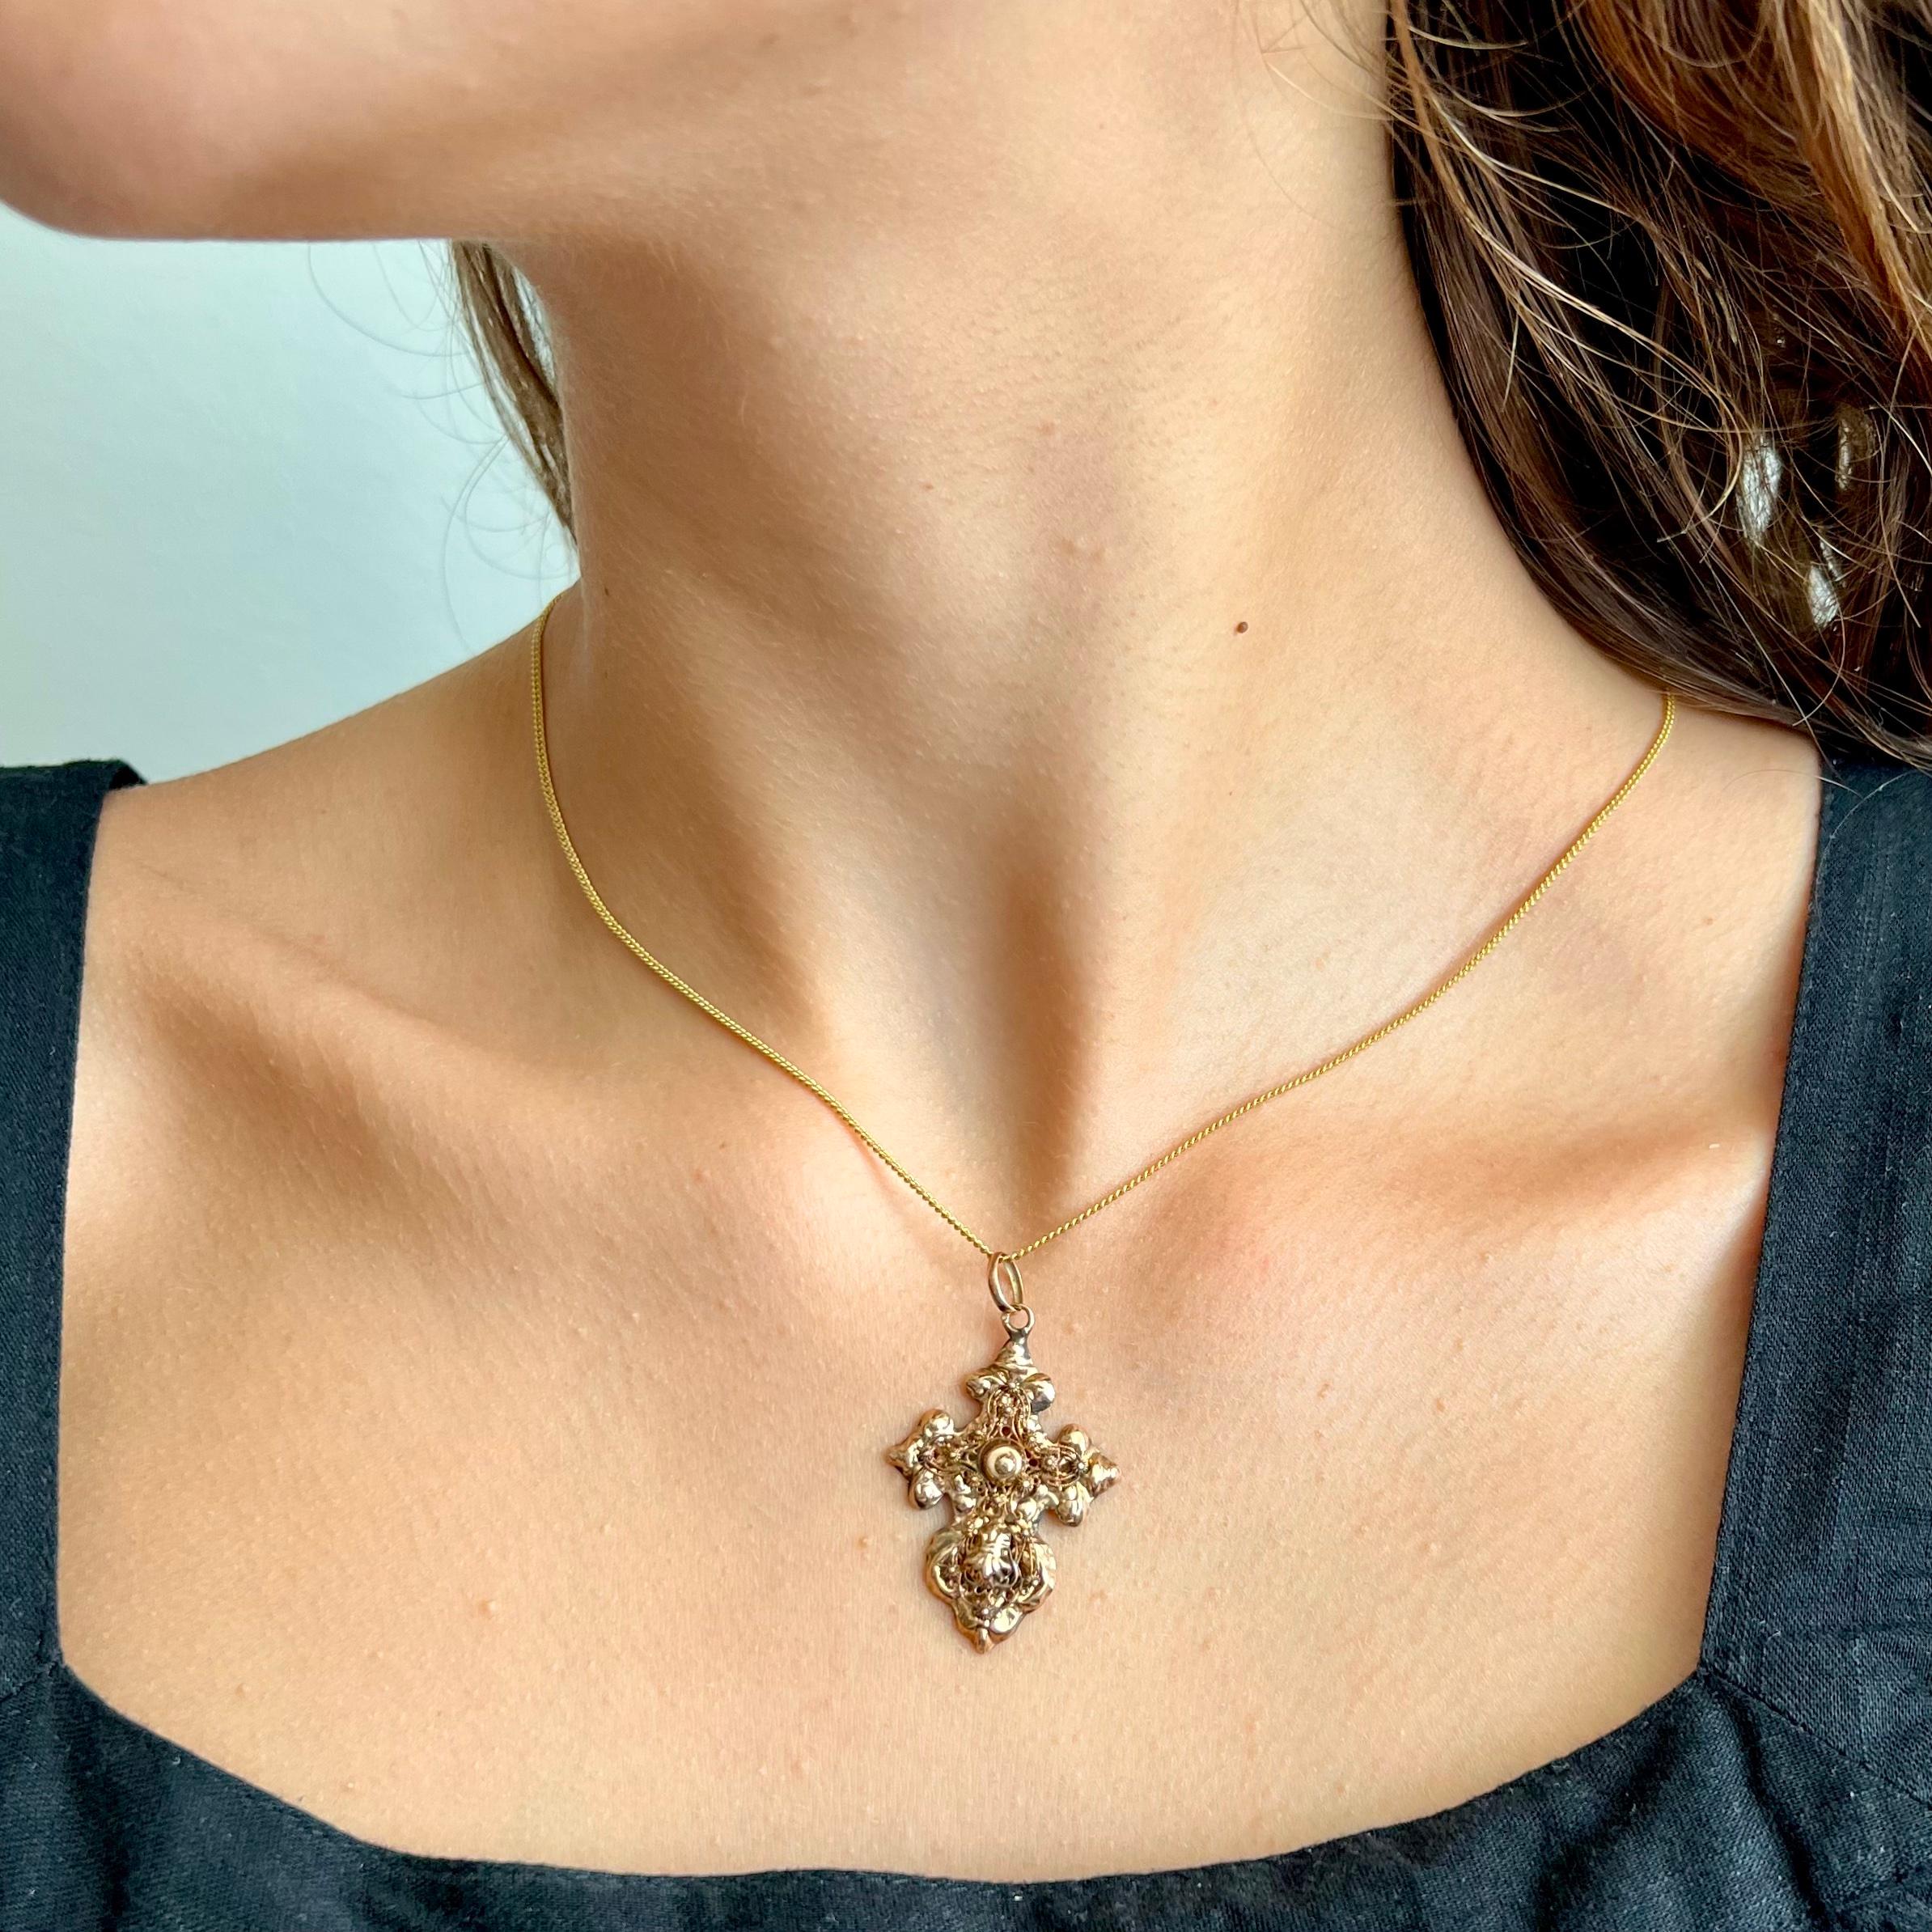 An antique 19th century Dutch cross pendant created with fine wire and cannetille work. This lovely antique cross is beautifully decorated with a repoussé design throughout the cross, a technique of metalworking in which the gold is shaped by